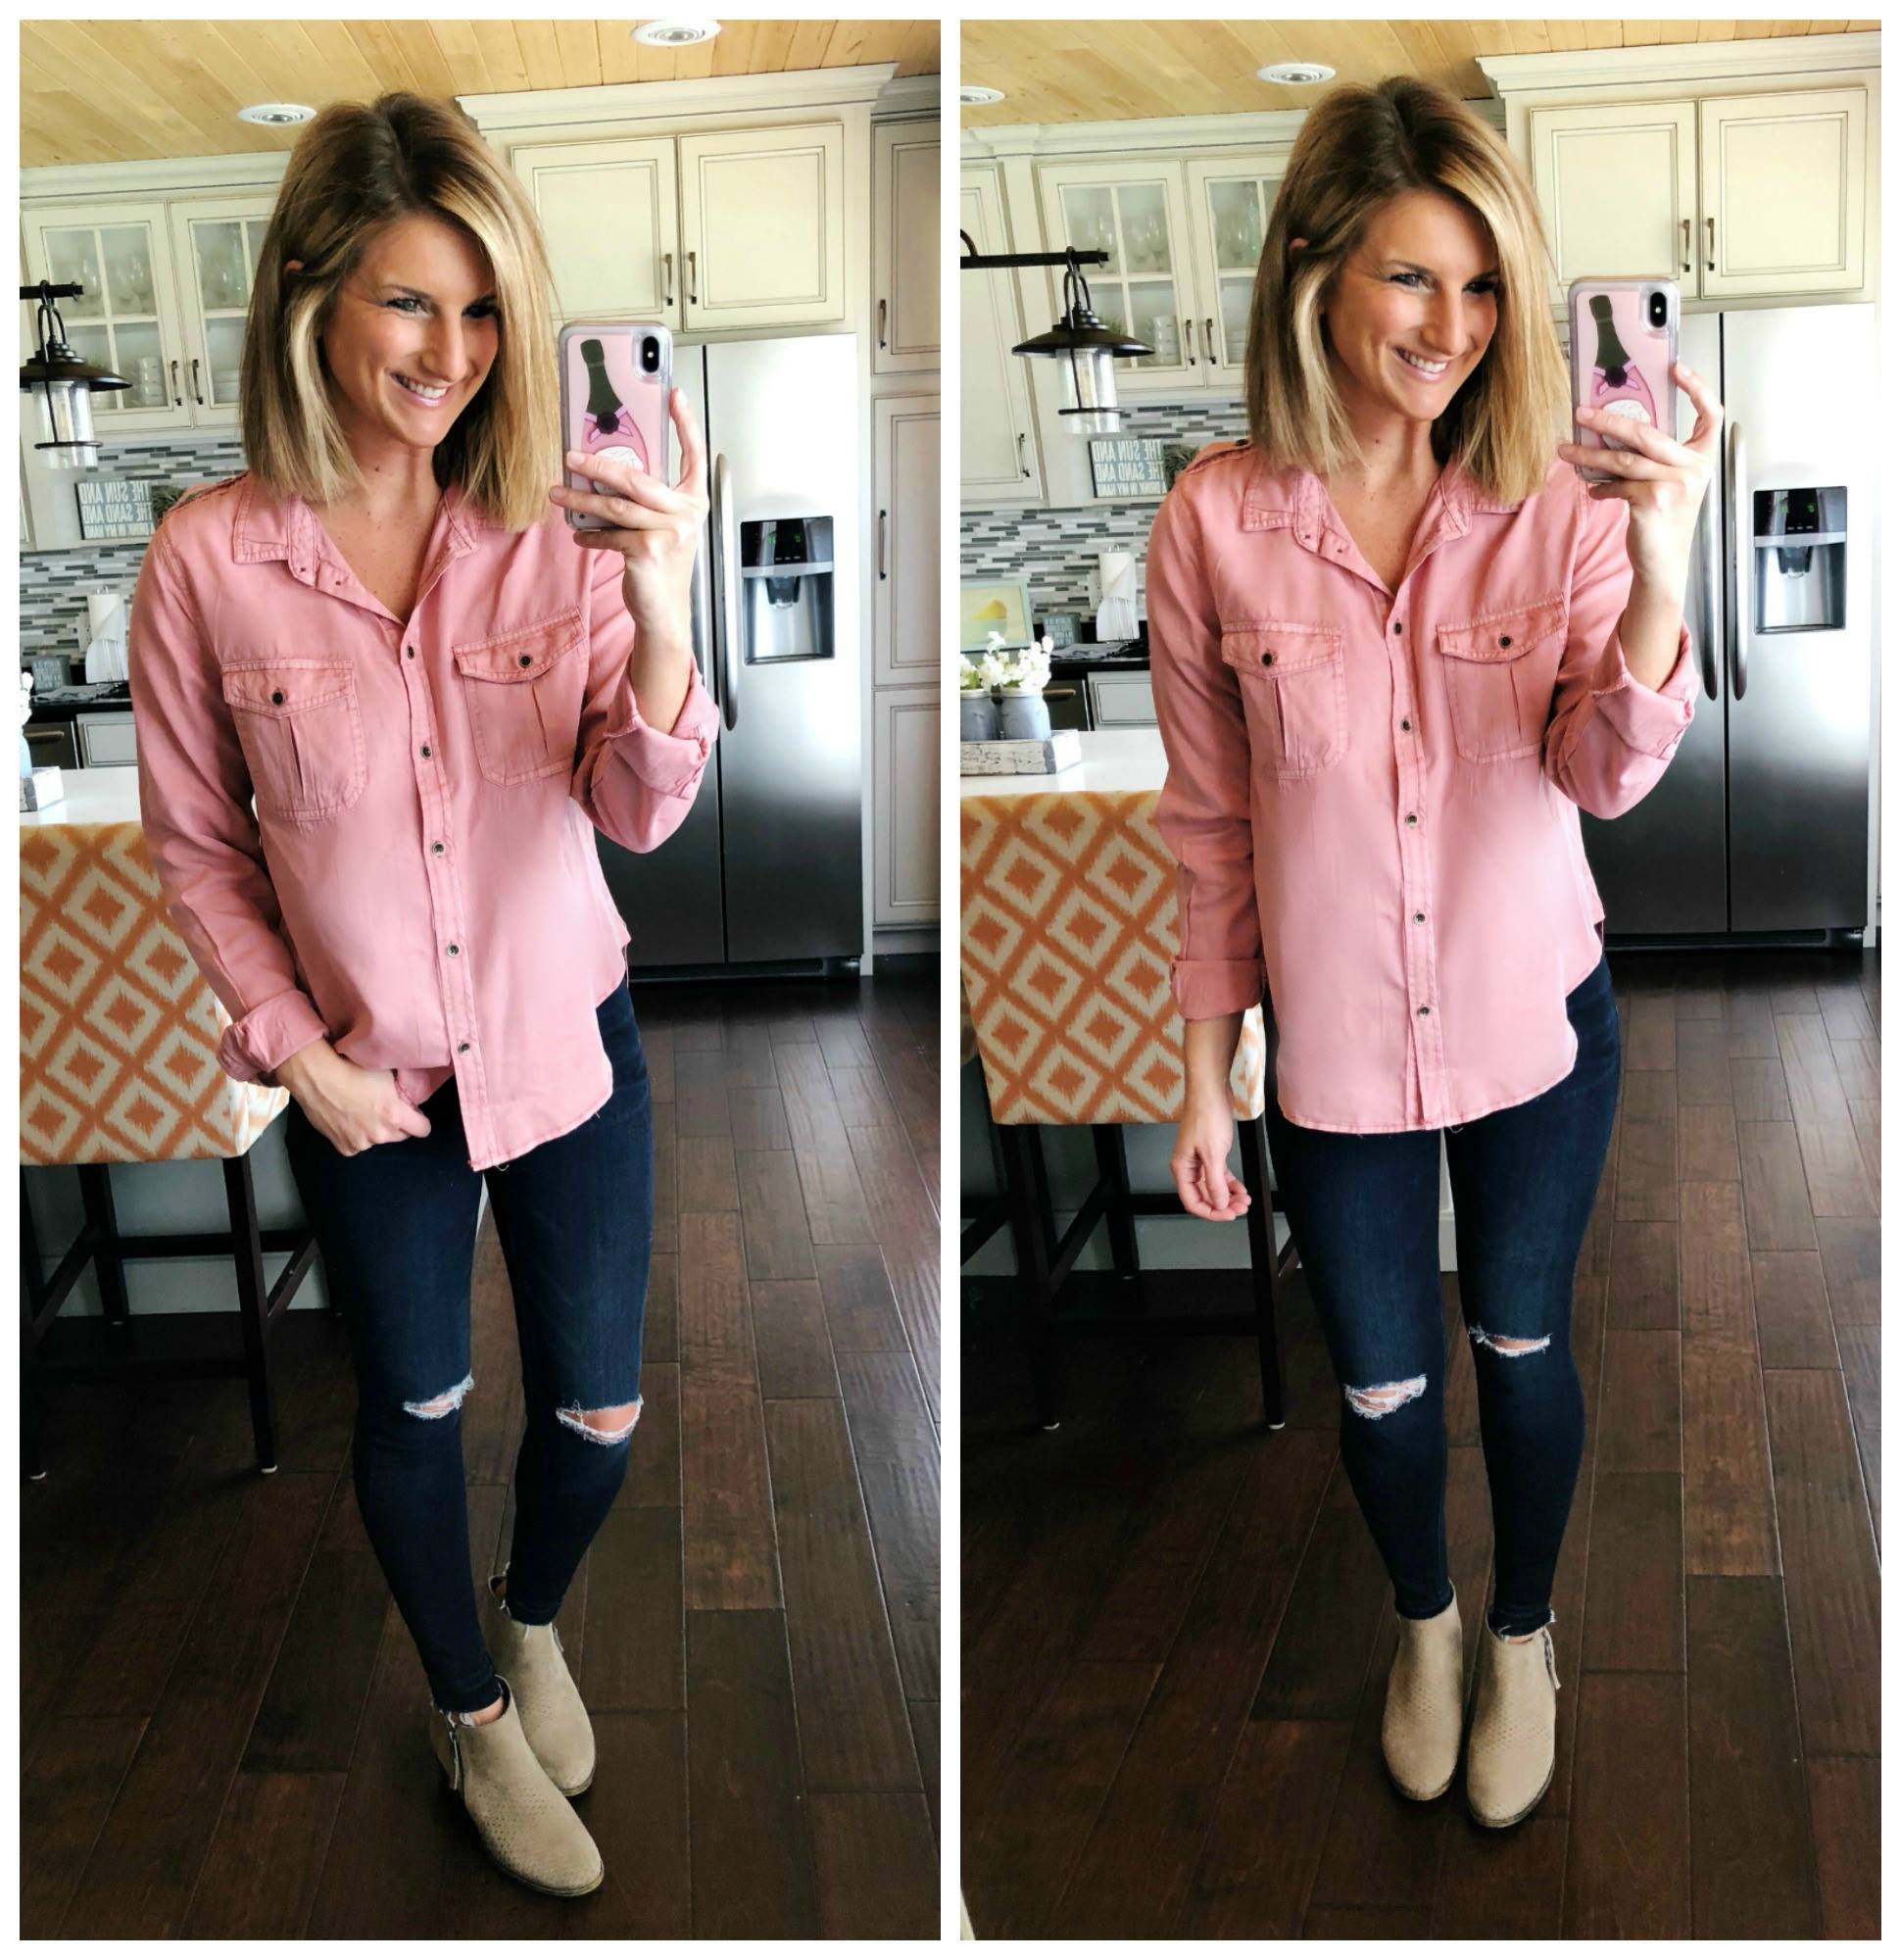 Blush Button Up + Distressed Jeggings + Tan Booties // How to Wear a Twill Shirt